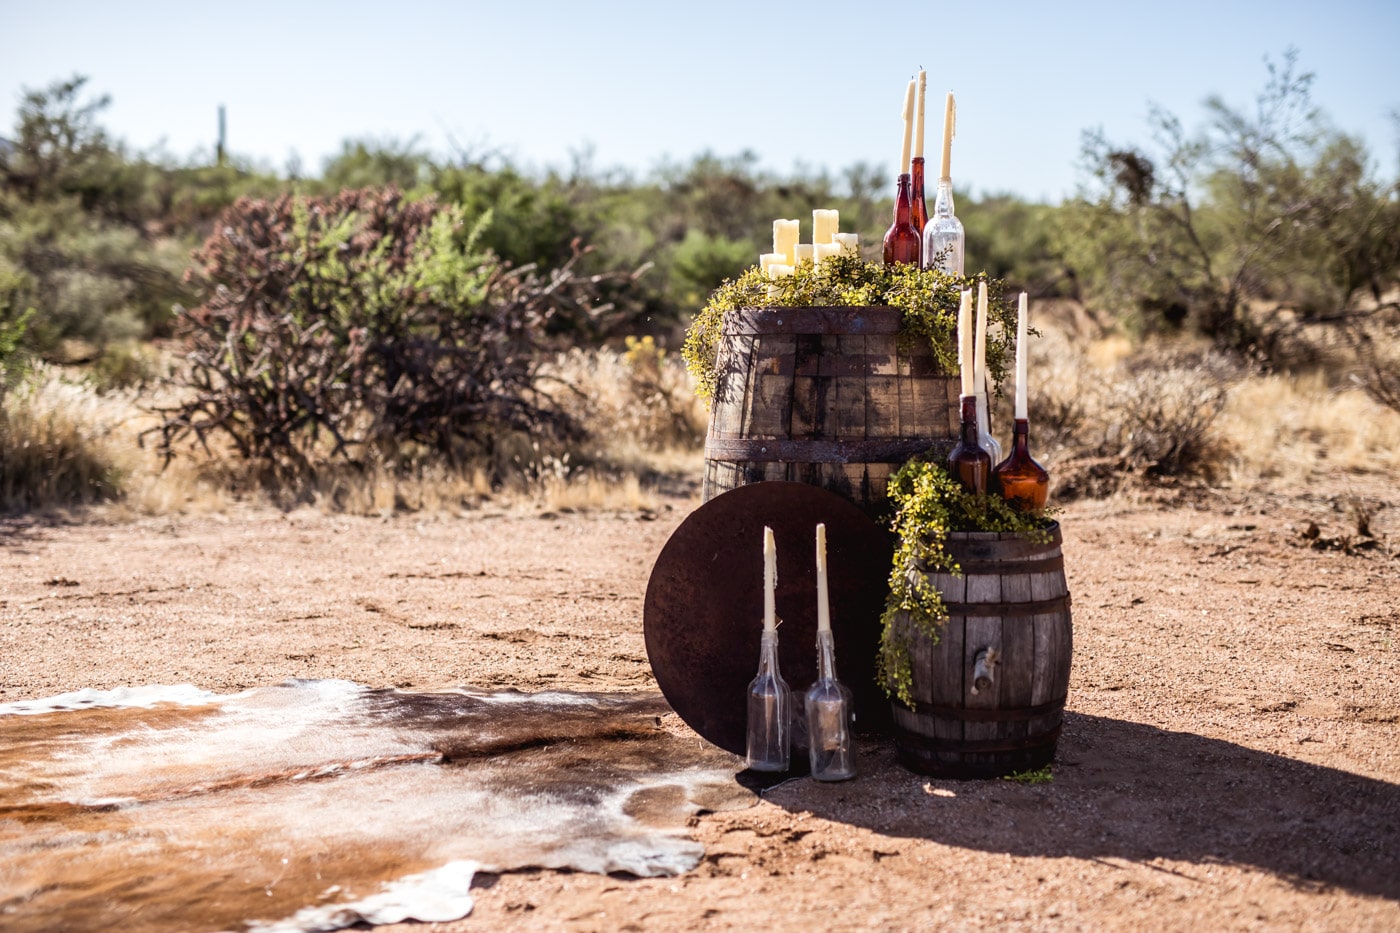 Barrels in desert with candles in glasses